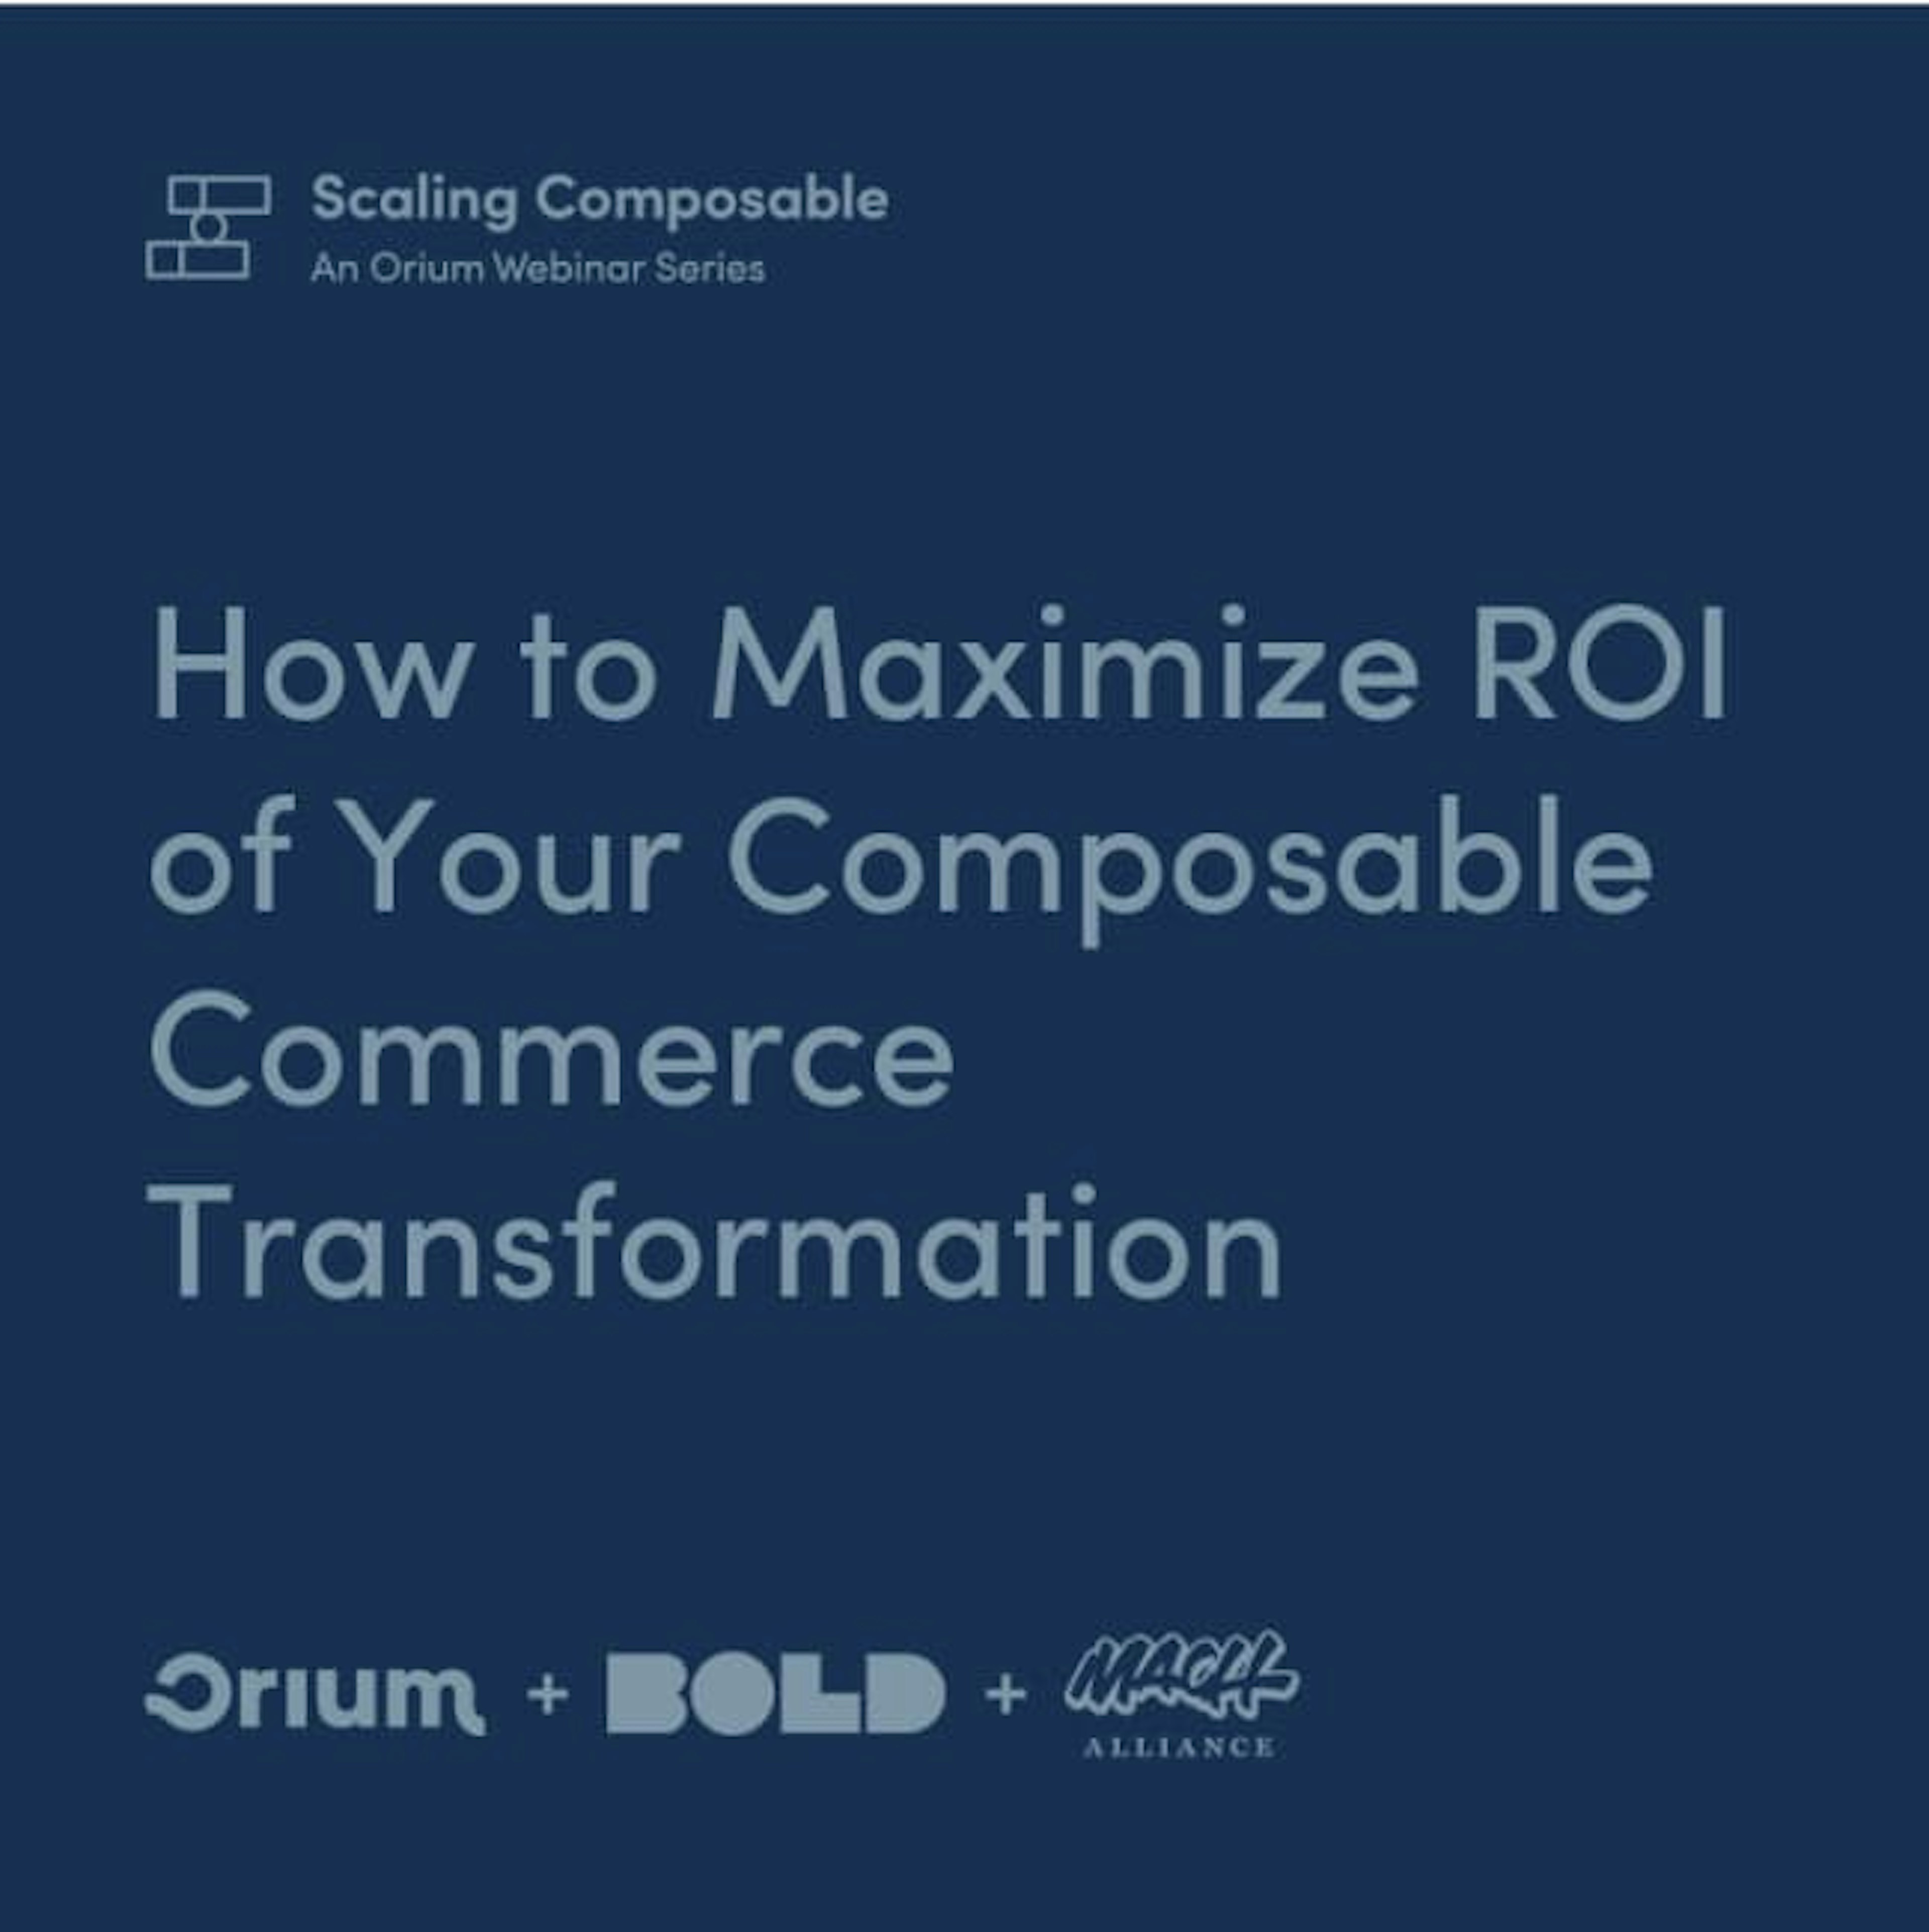 Thumbnail for a webinar called 'How to Maximize ROI of Your Composable Commerce Transformation', part of Scaling Composable: An Orium Webinar Series.